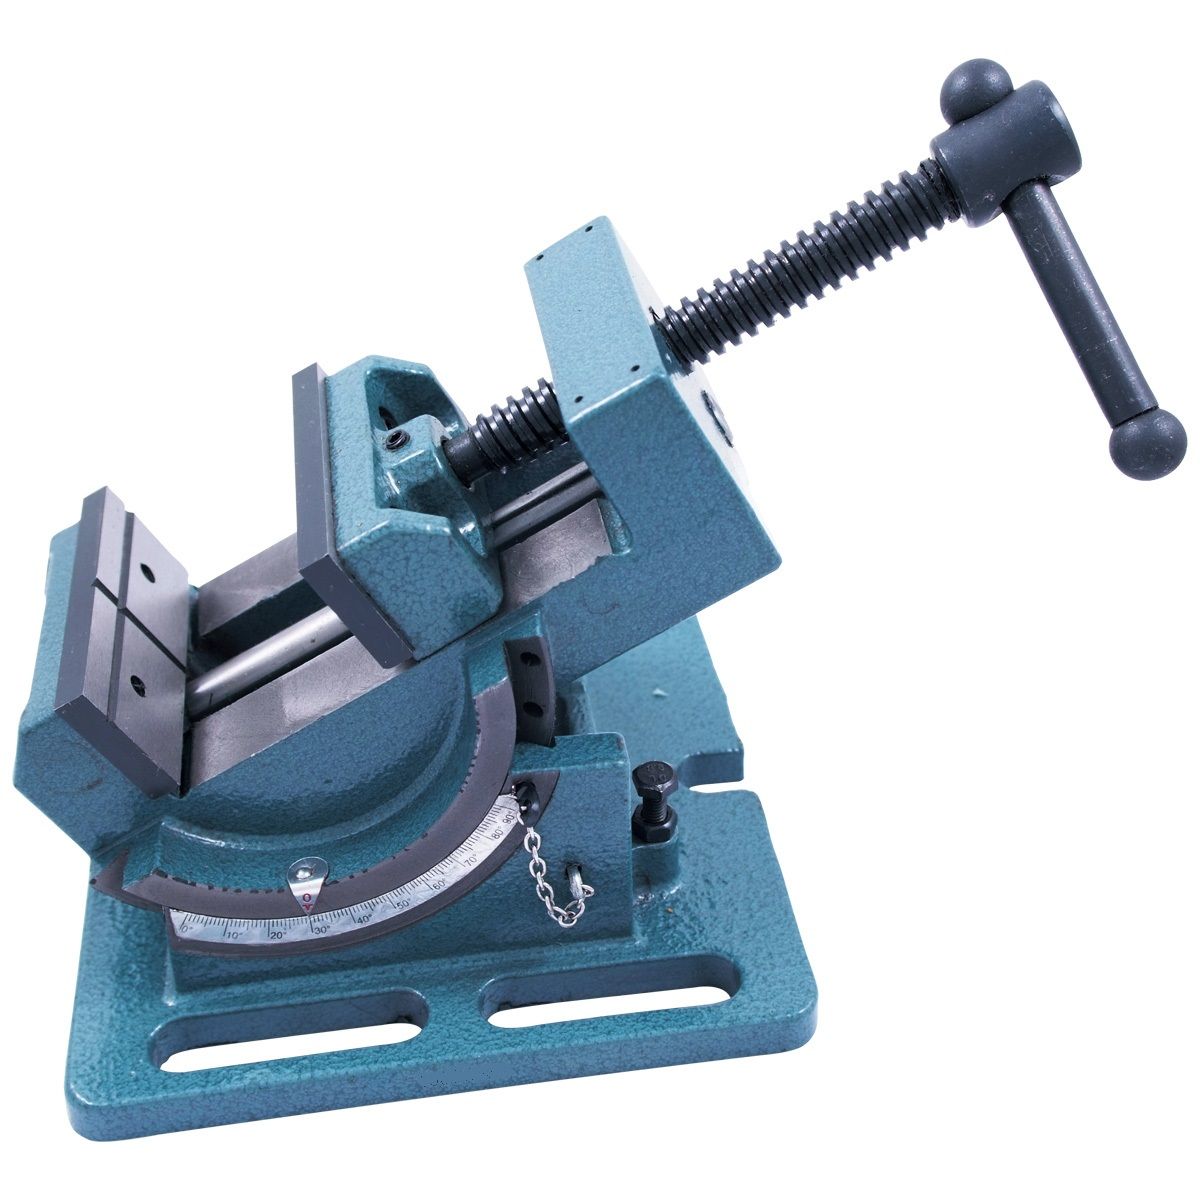 3" DELUXE TILTING ANGLE VISE (3900-2683)